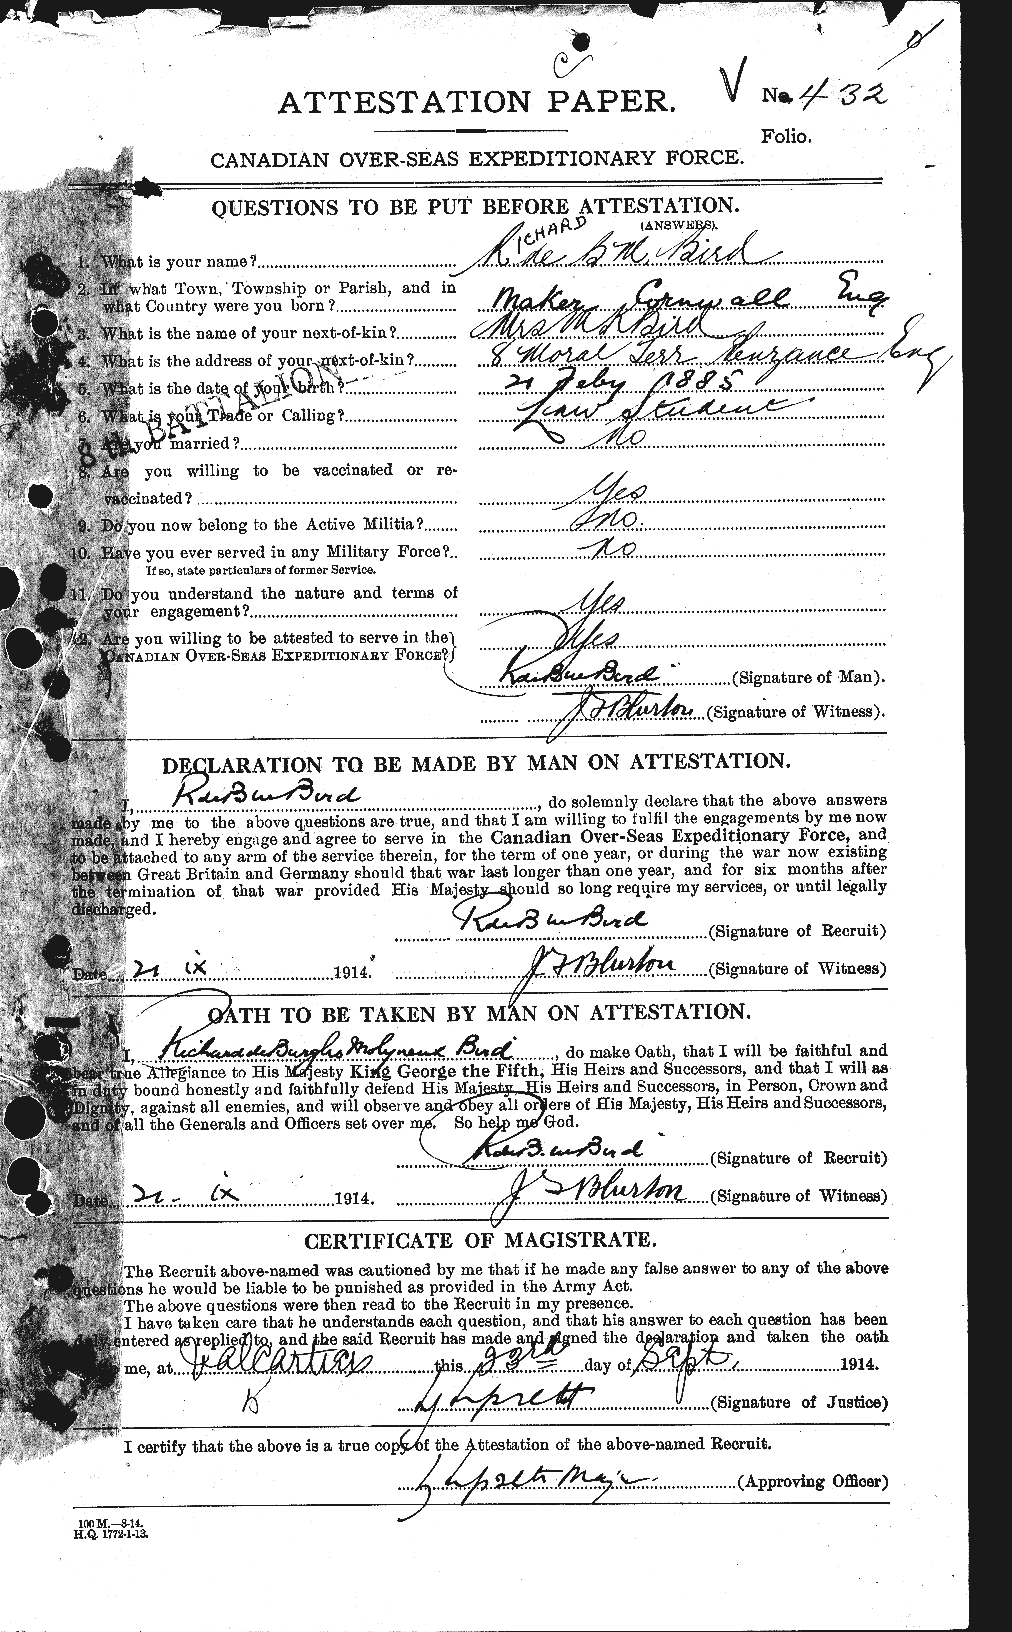 Personnel Records of the First World War - CEF 239496a